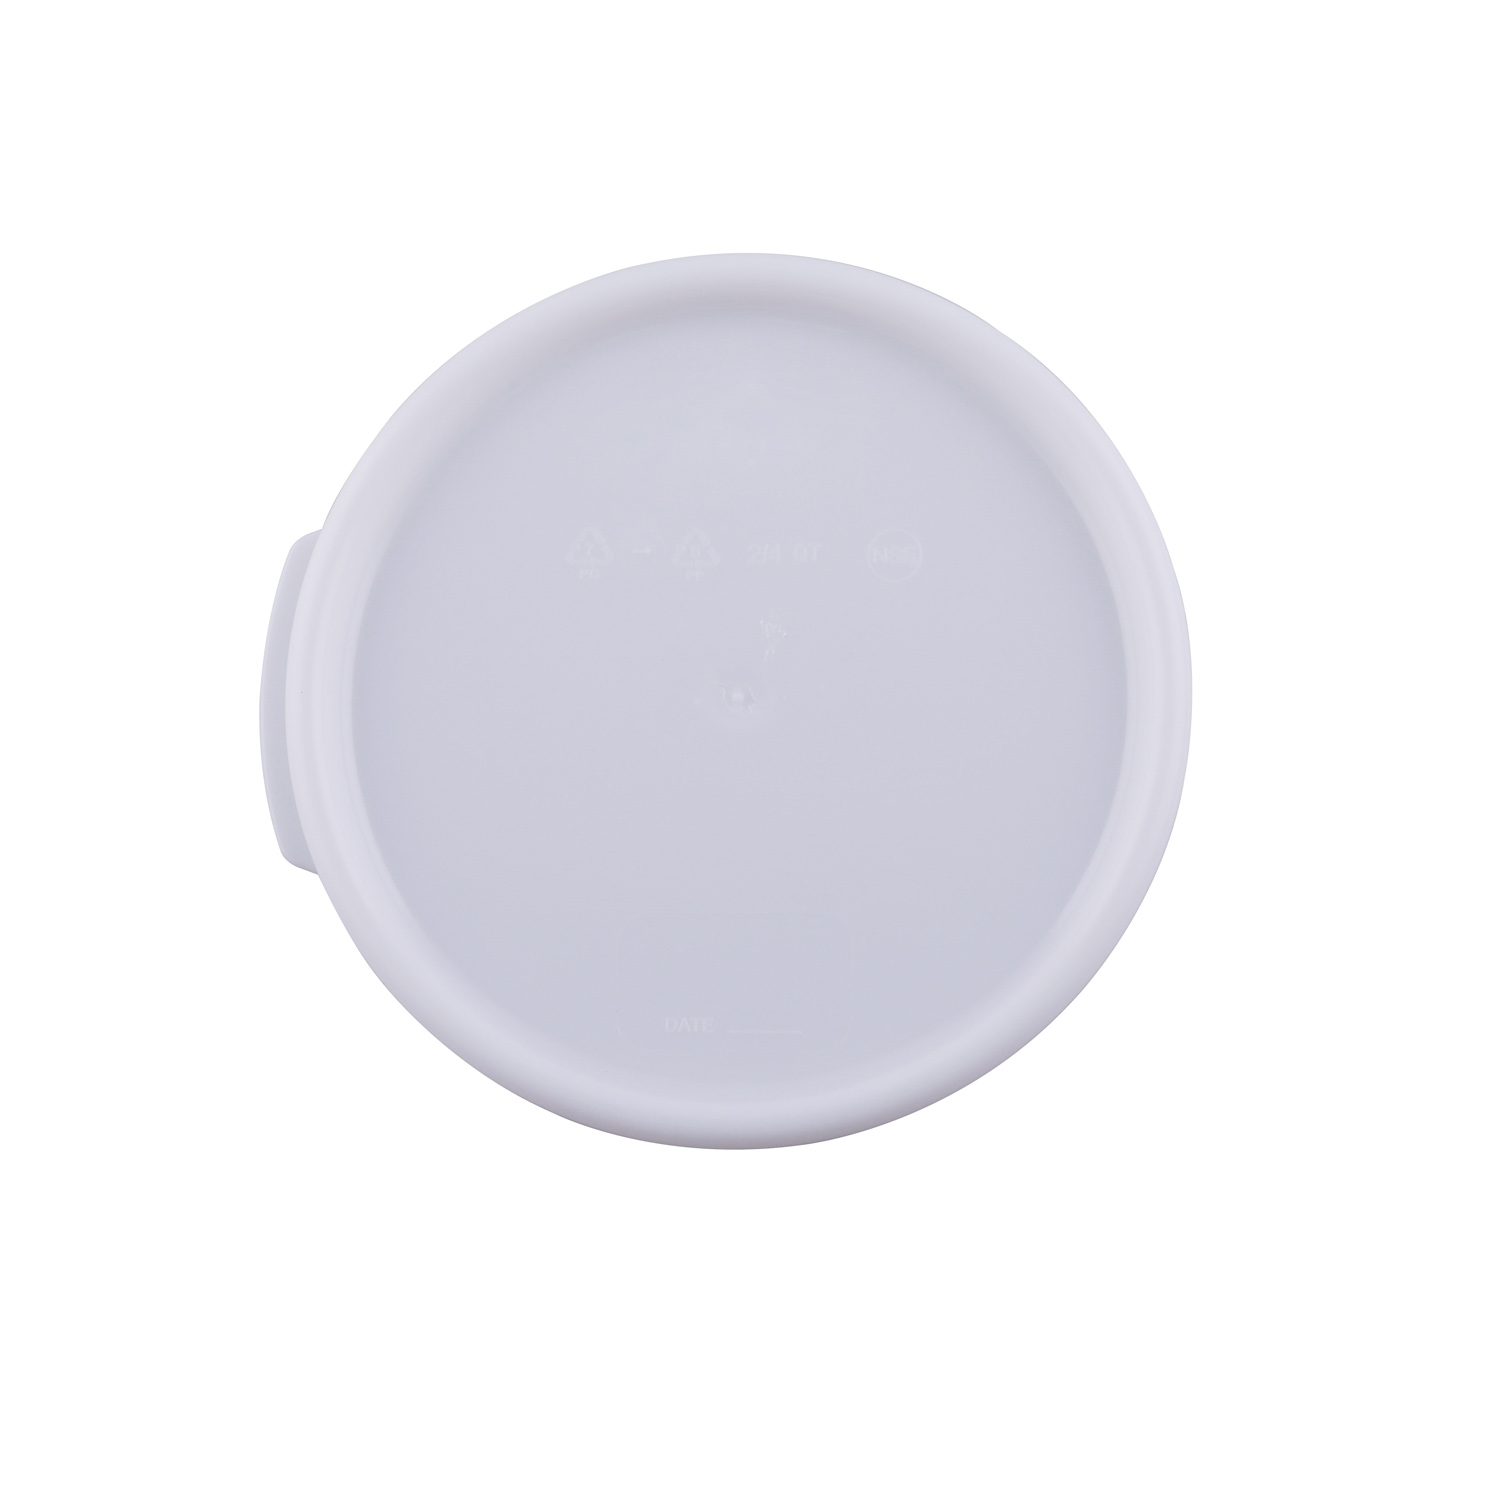 CAC China FS3R-24CV-W Round White Food Storage Container Cover for 2 Qt. &4 Qt.